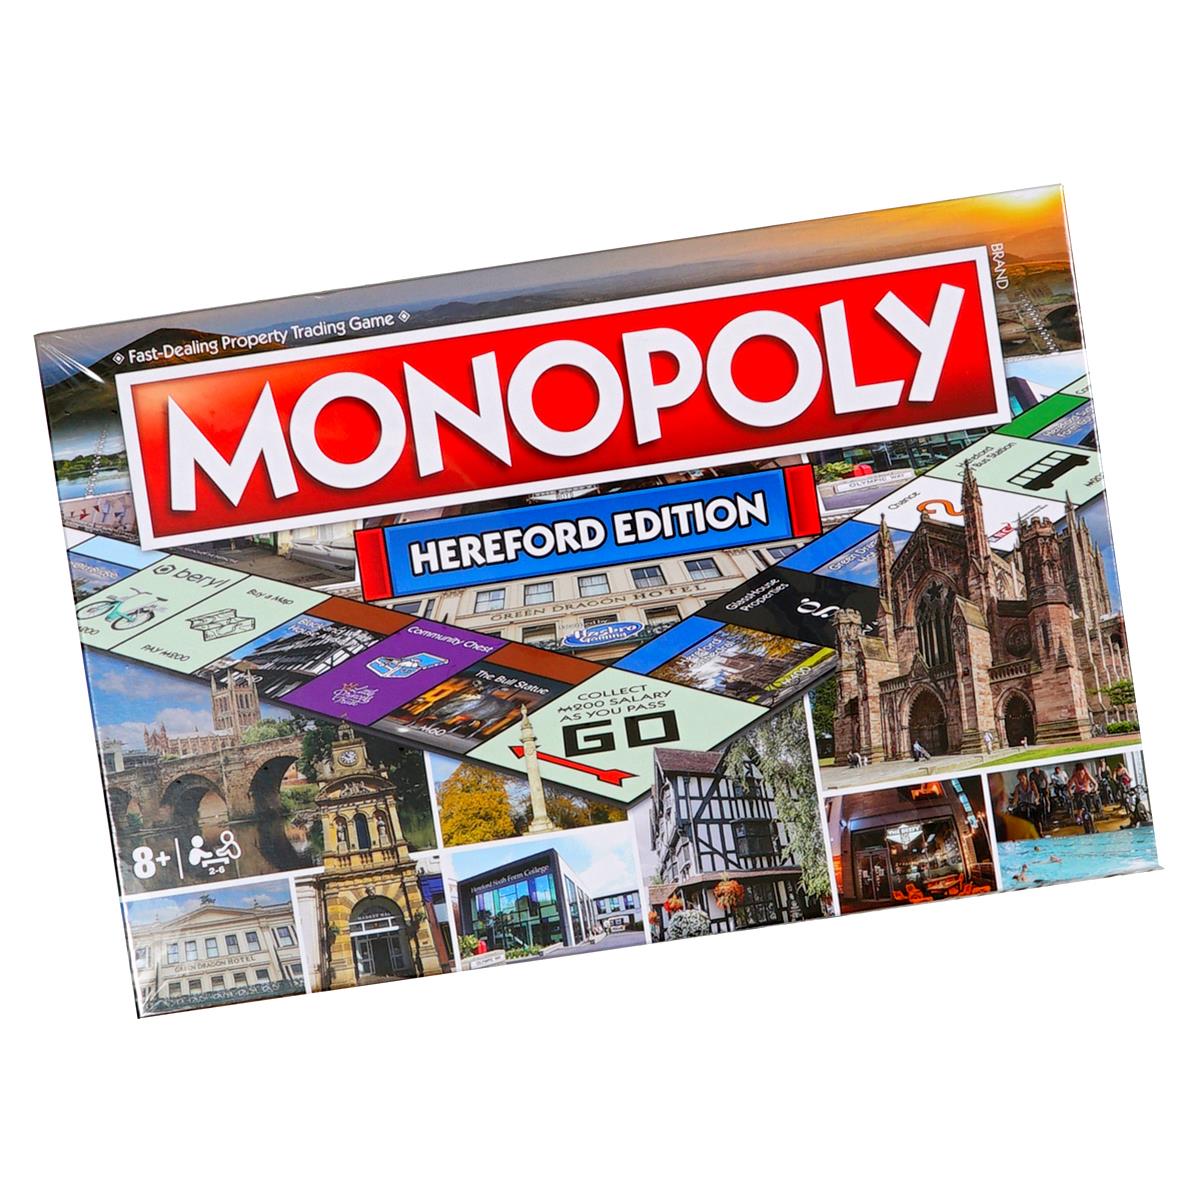 What famous buildings are in the new Hereford Monopoly?